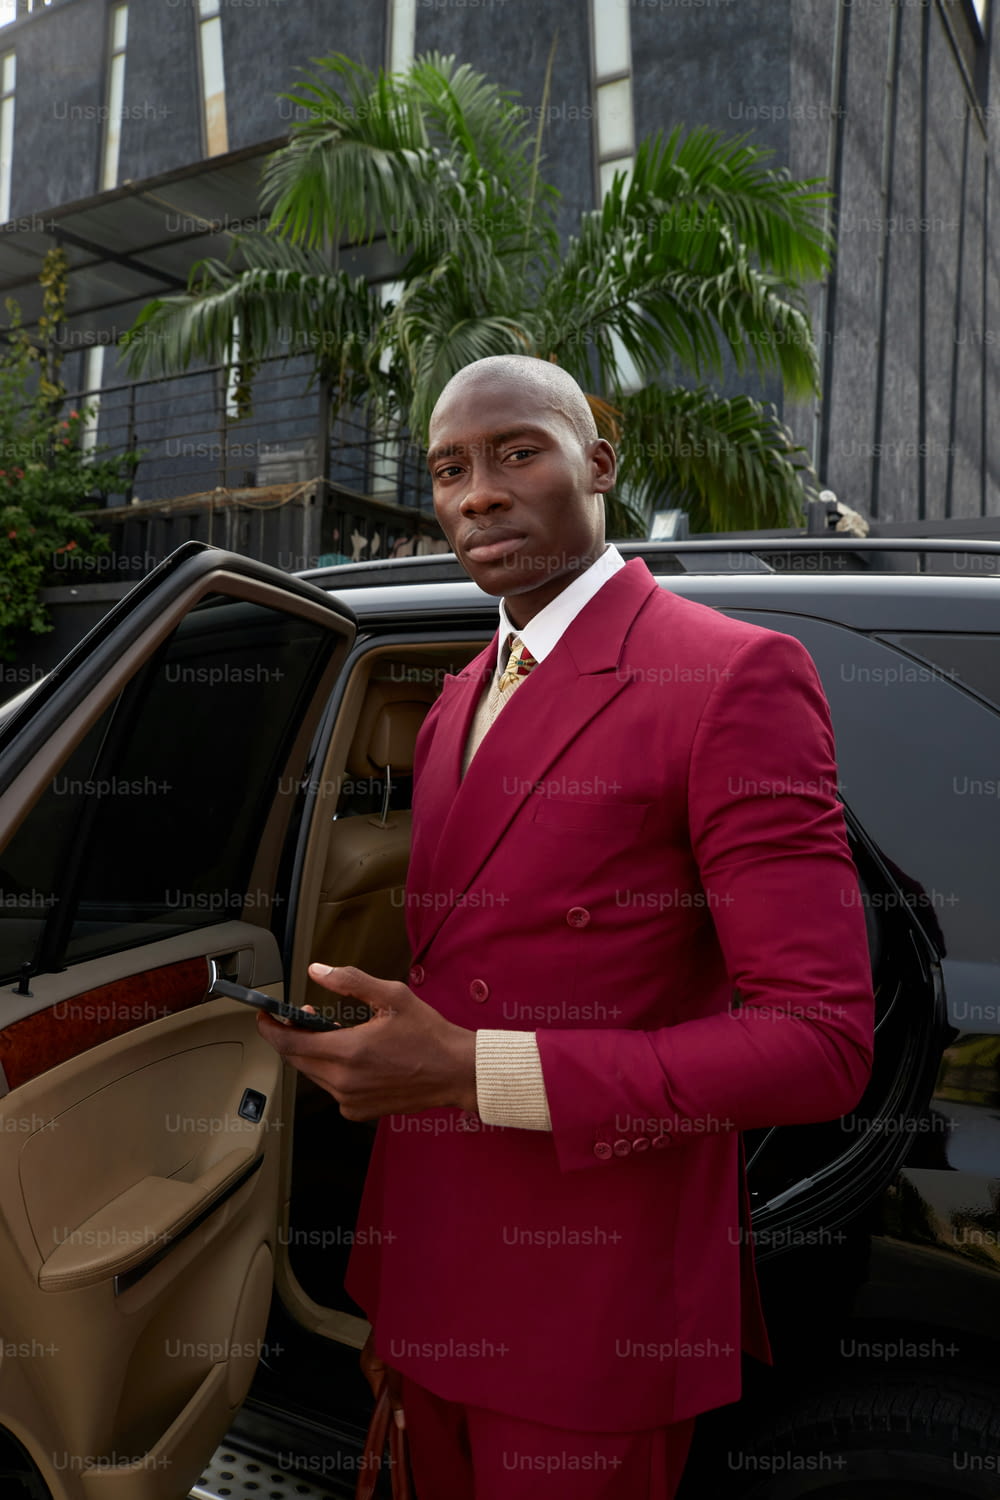 a man in a red suit standing next to a car